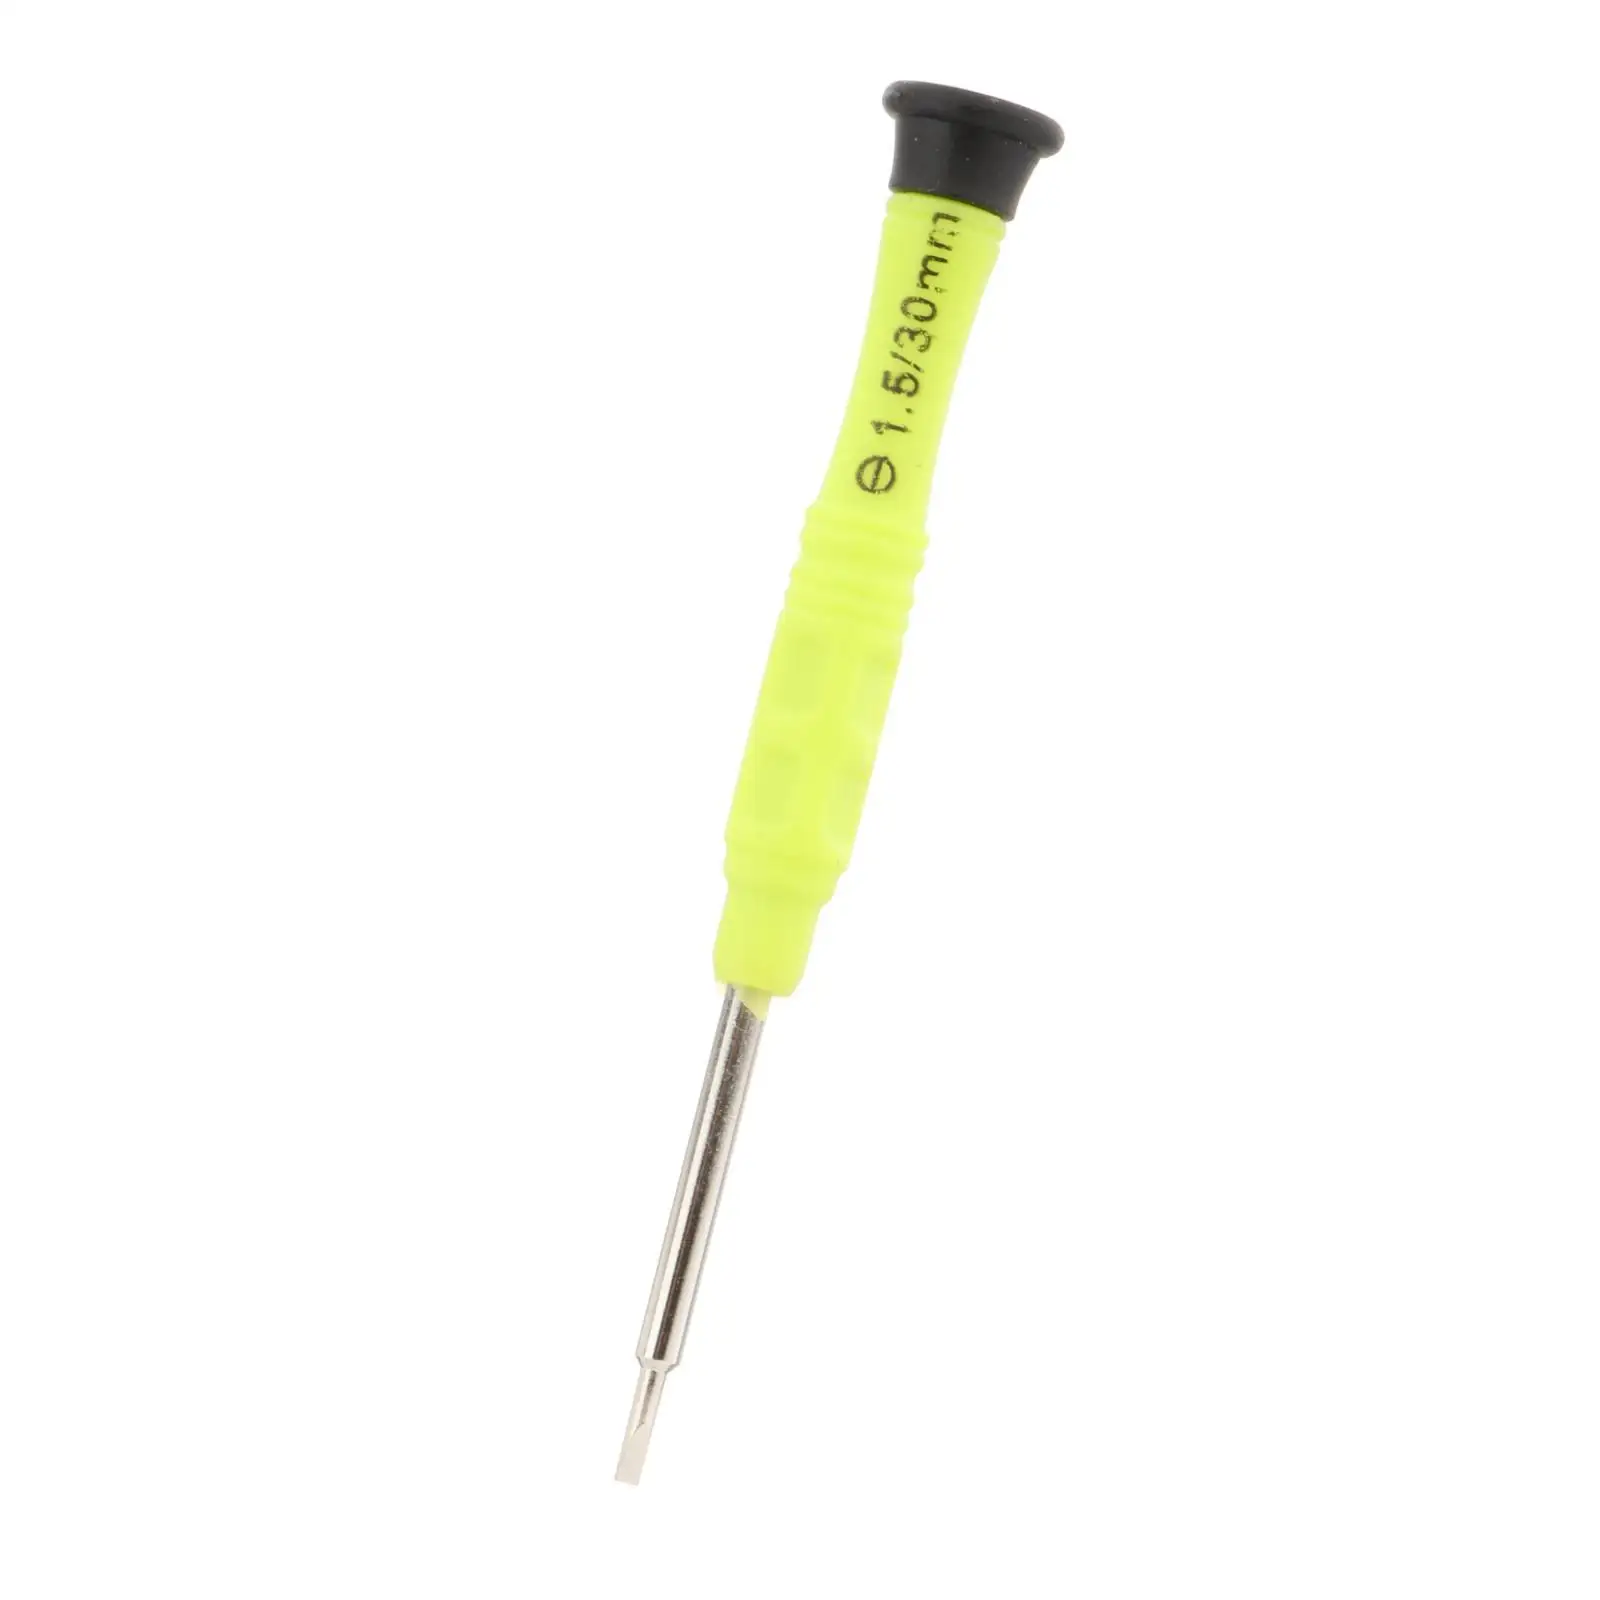 Epee Fencing Screwdriver Easy to Use Repair Tool Professional Hand Tool for